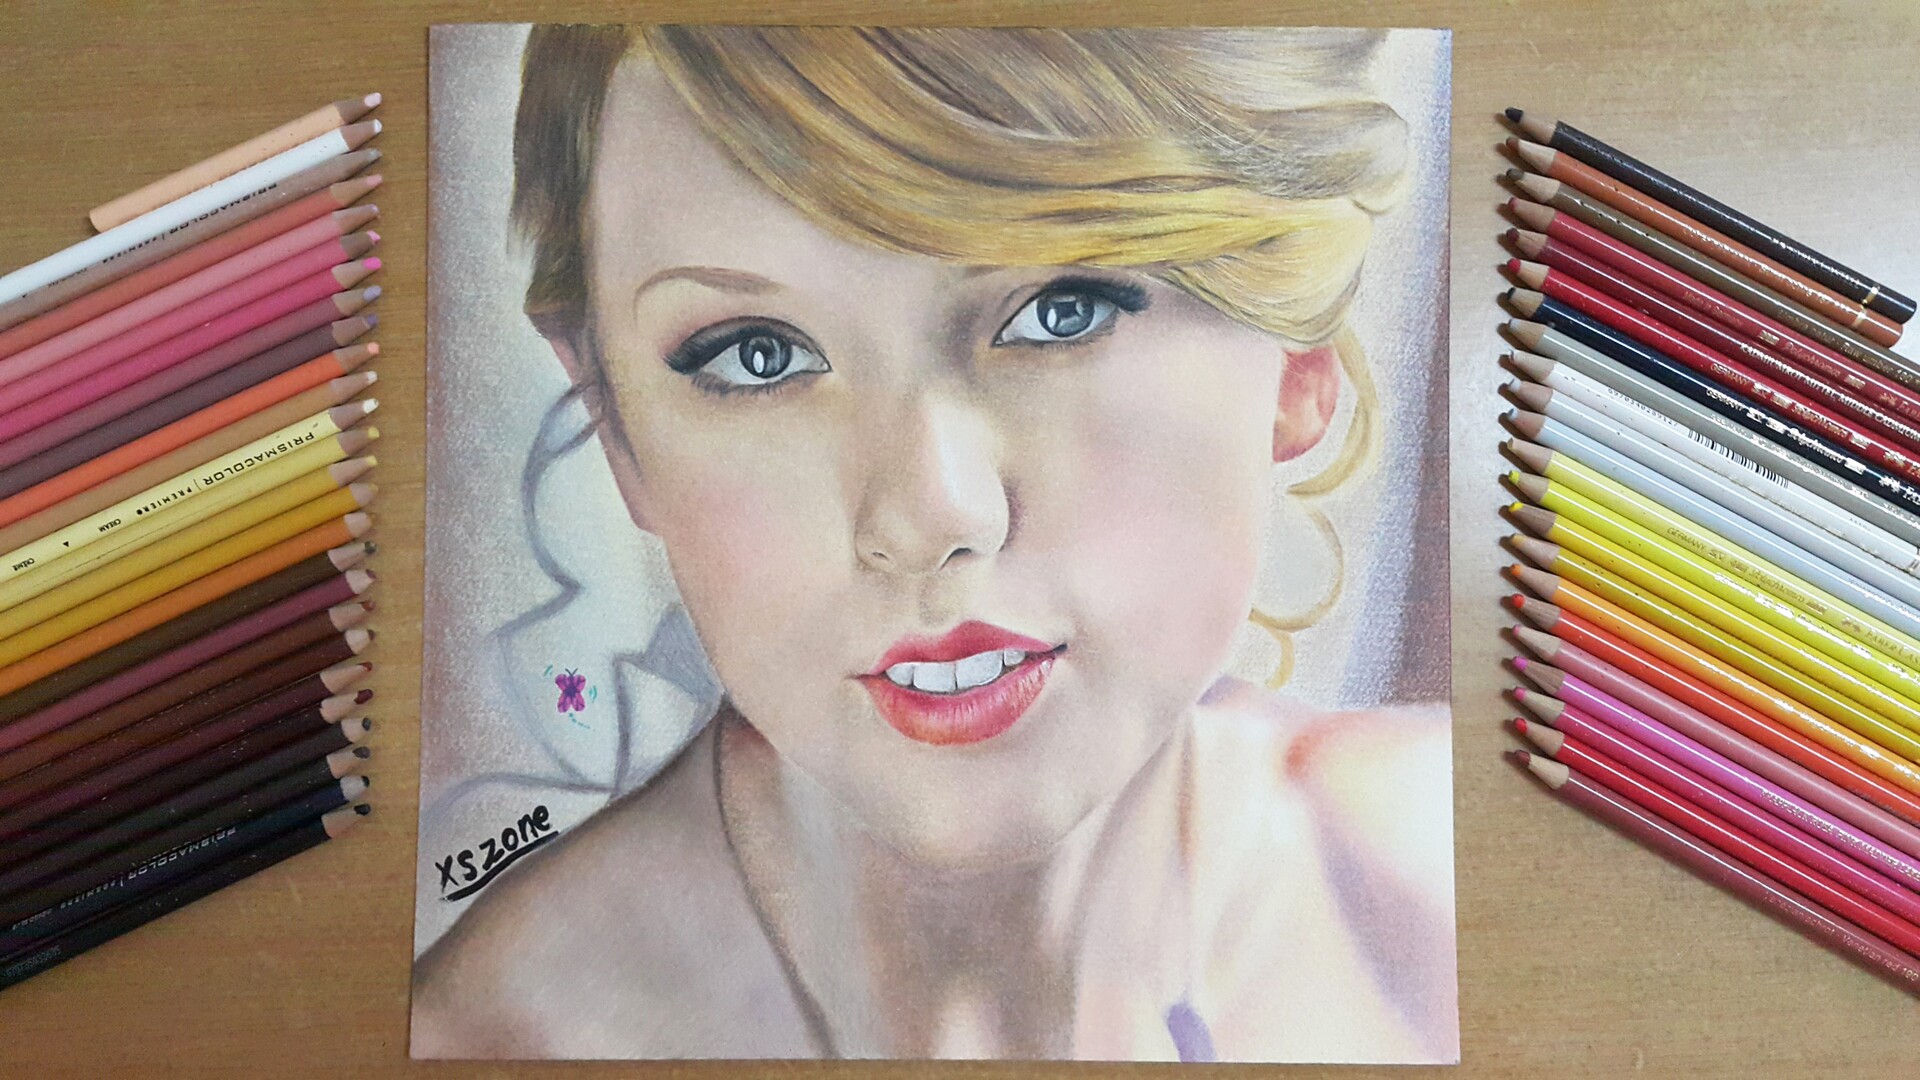 Color Pencils Cross Hatching (Taylor Swift) by KatsuSing on DeviantArt